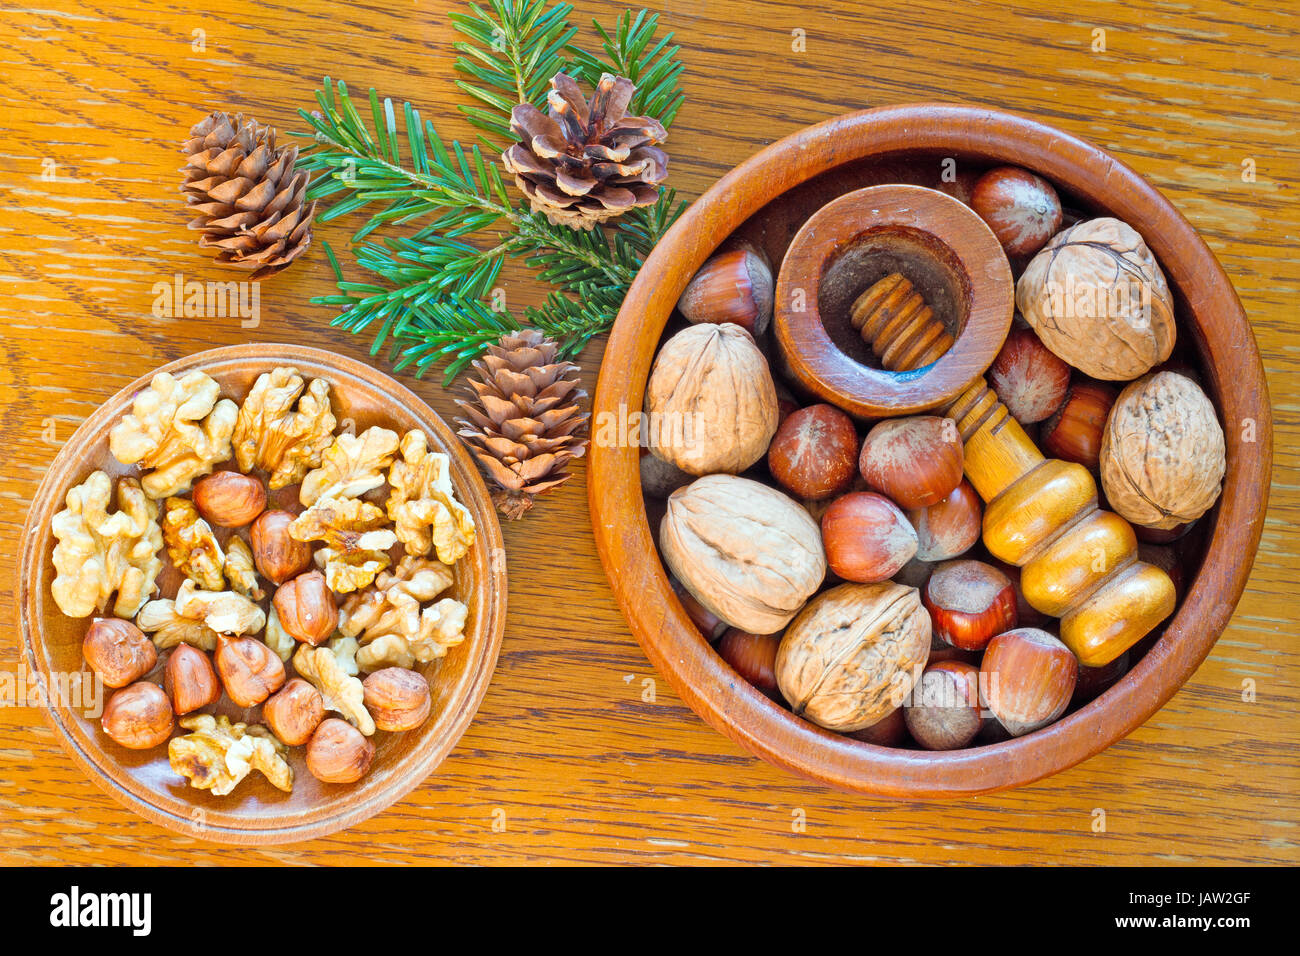 Cracking nuts Stock Photo